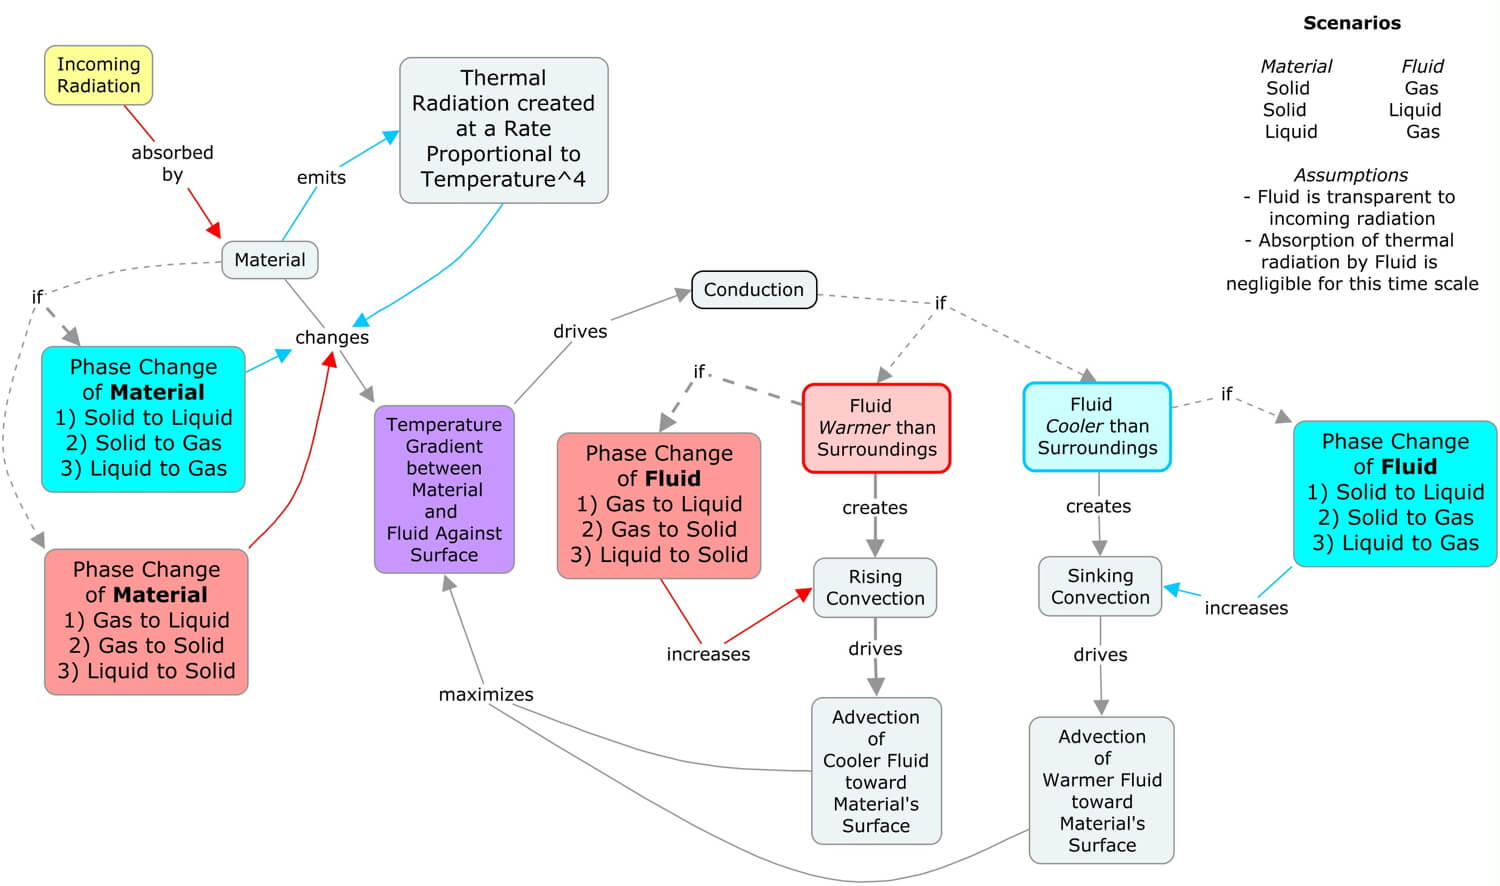 Concept map showing the interactions of the five main heat transfer processes: conduction, radiation, advection, convection, and latent heat.